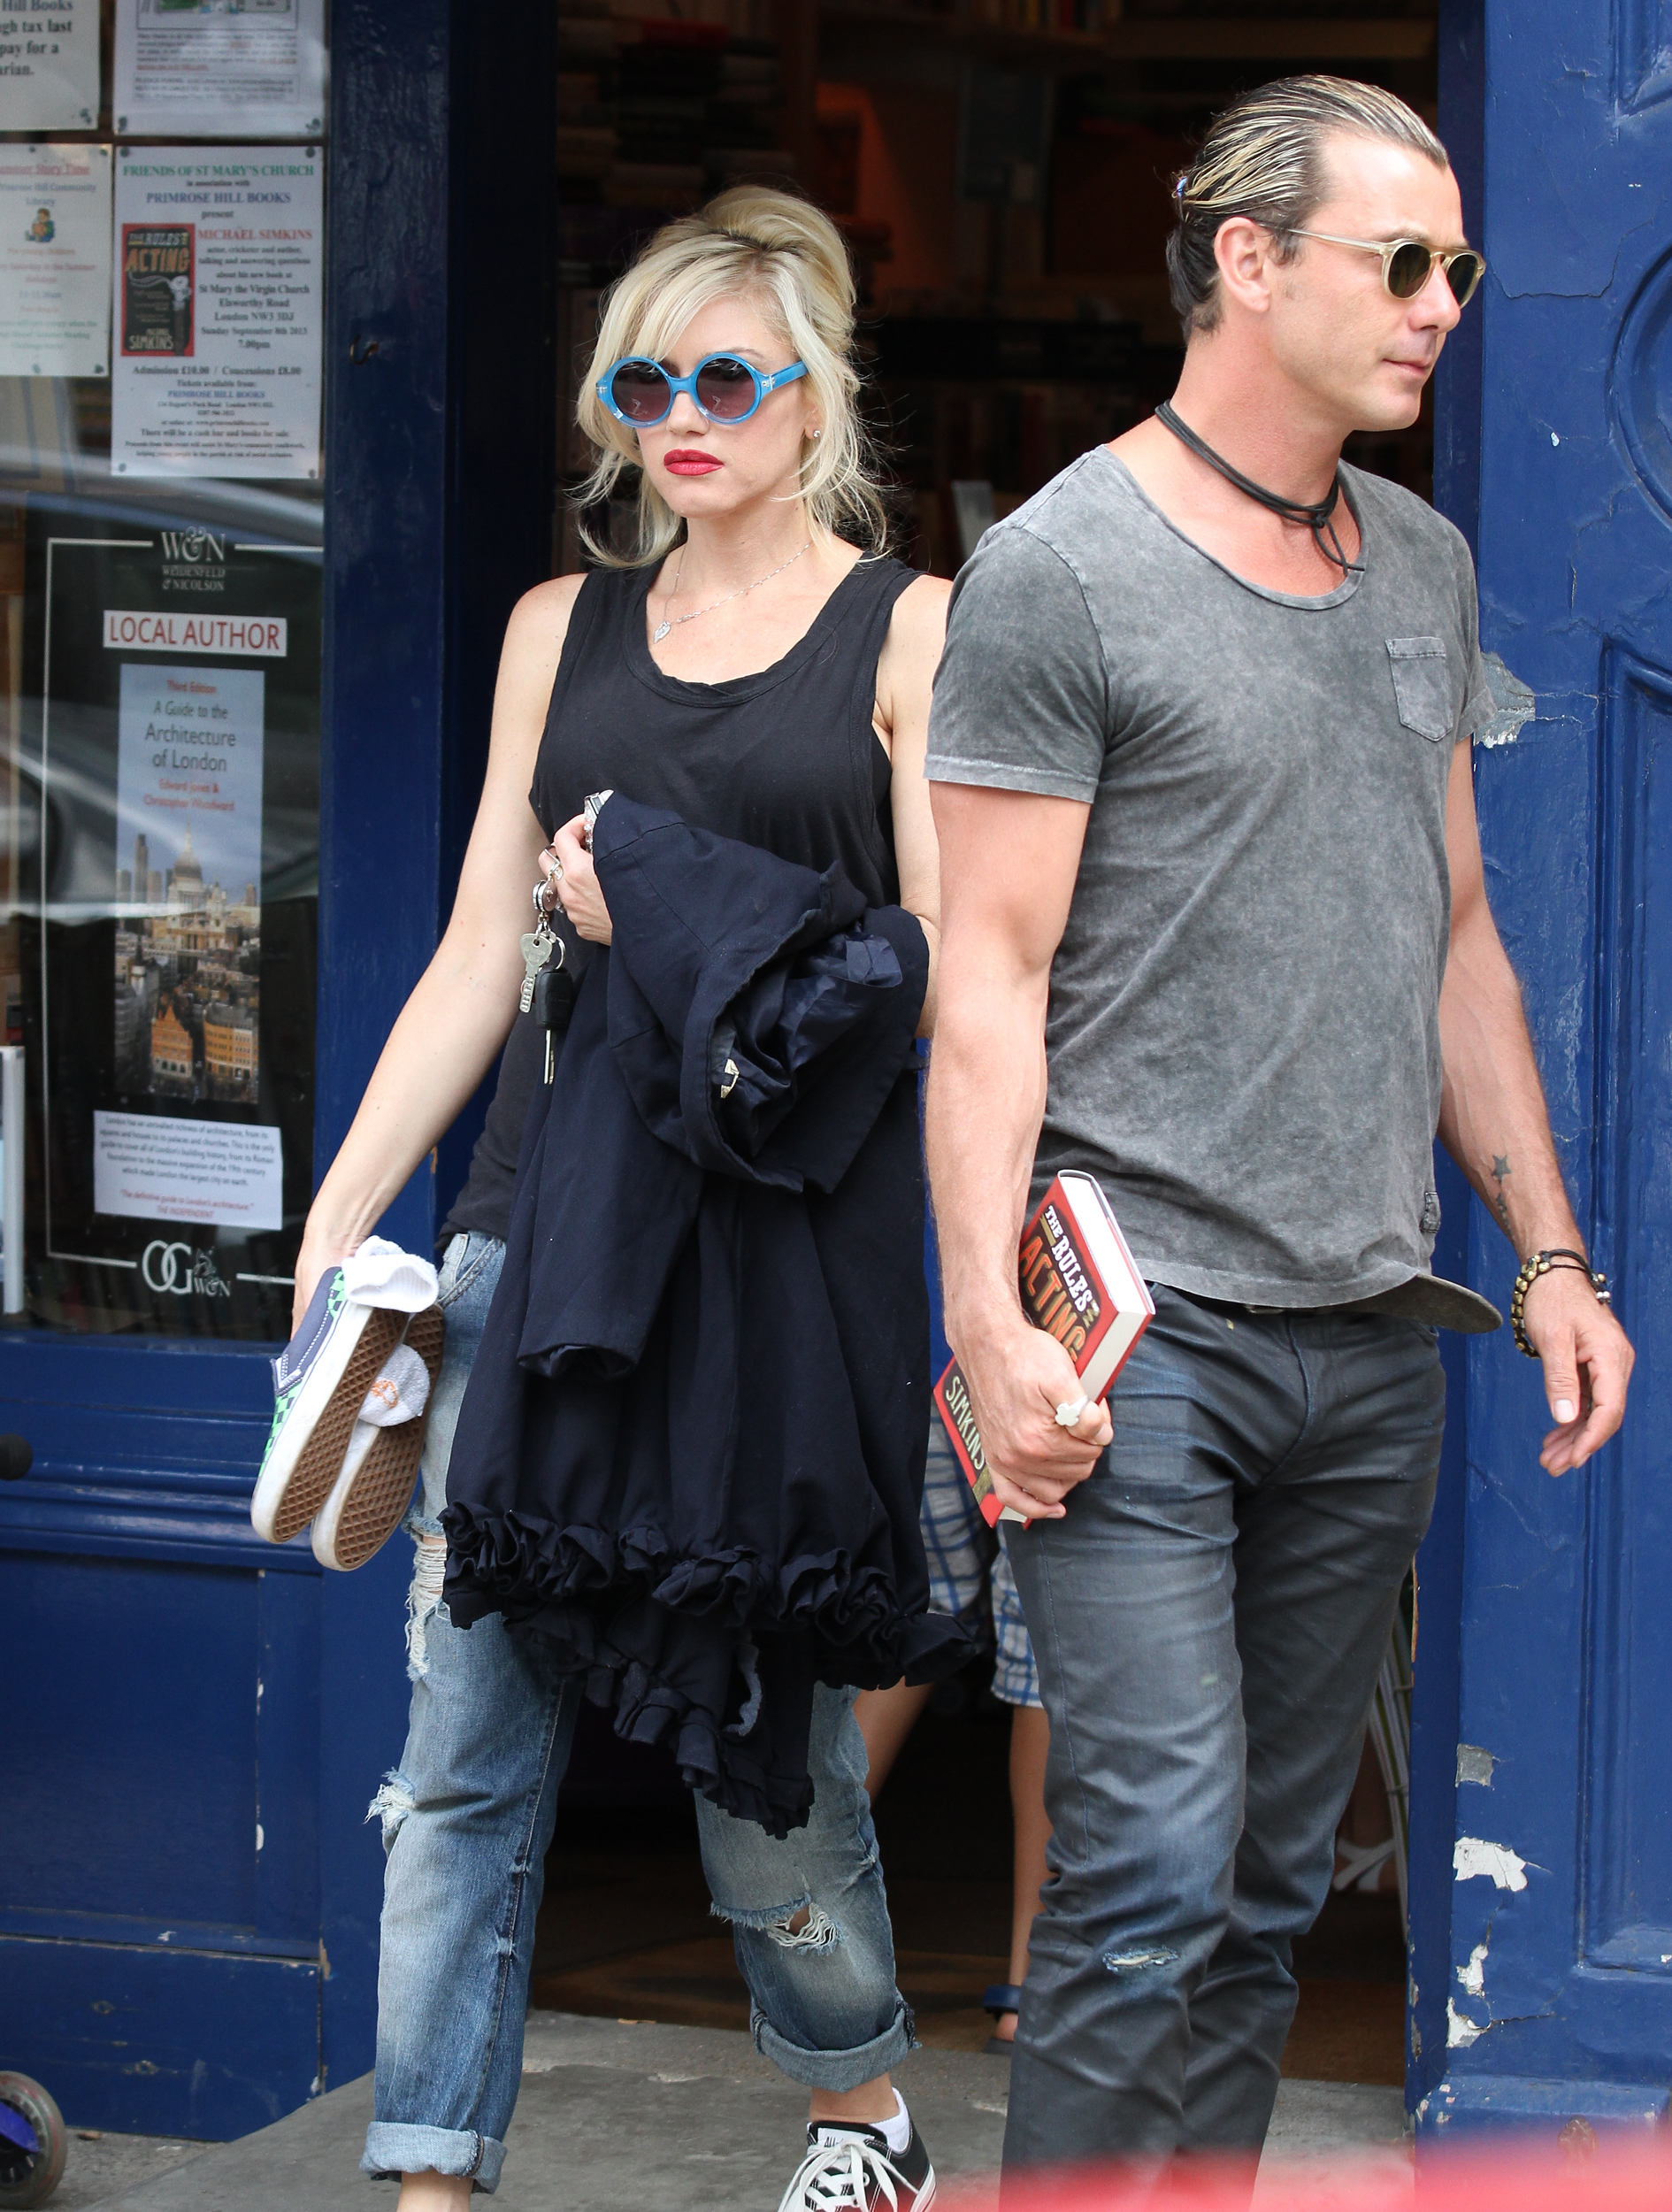 Gavin Rossdale and Gwen Stefani sighting in Primrose Hill in London, England, on August 20, 2013. | Source: Getty Images